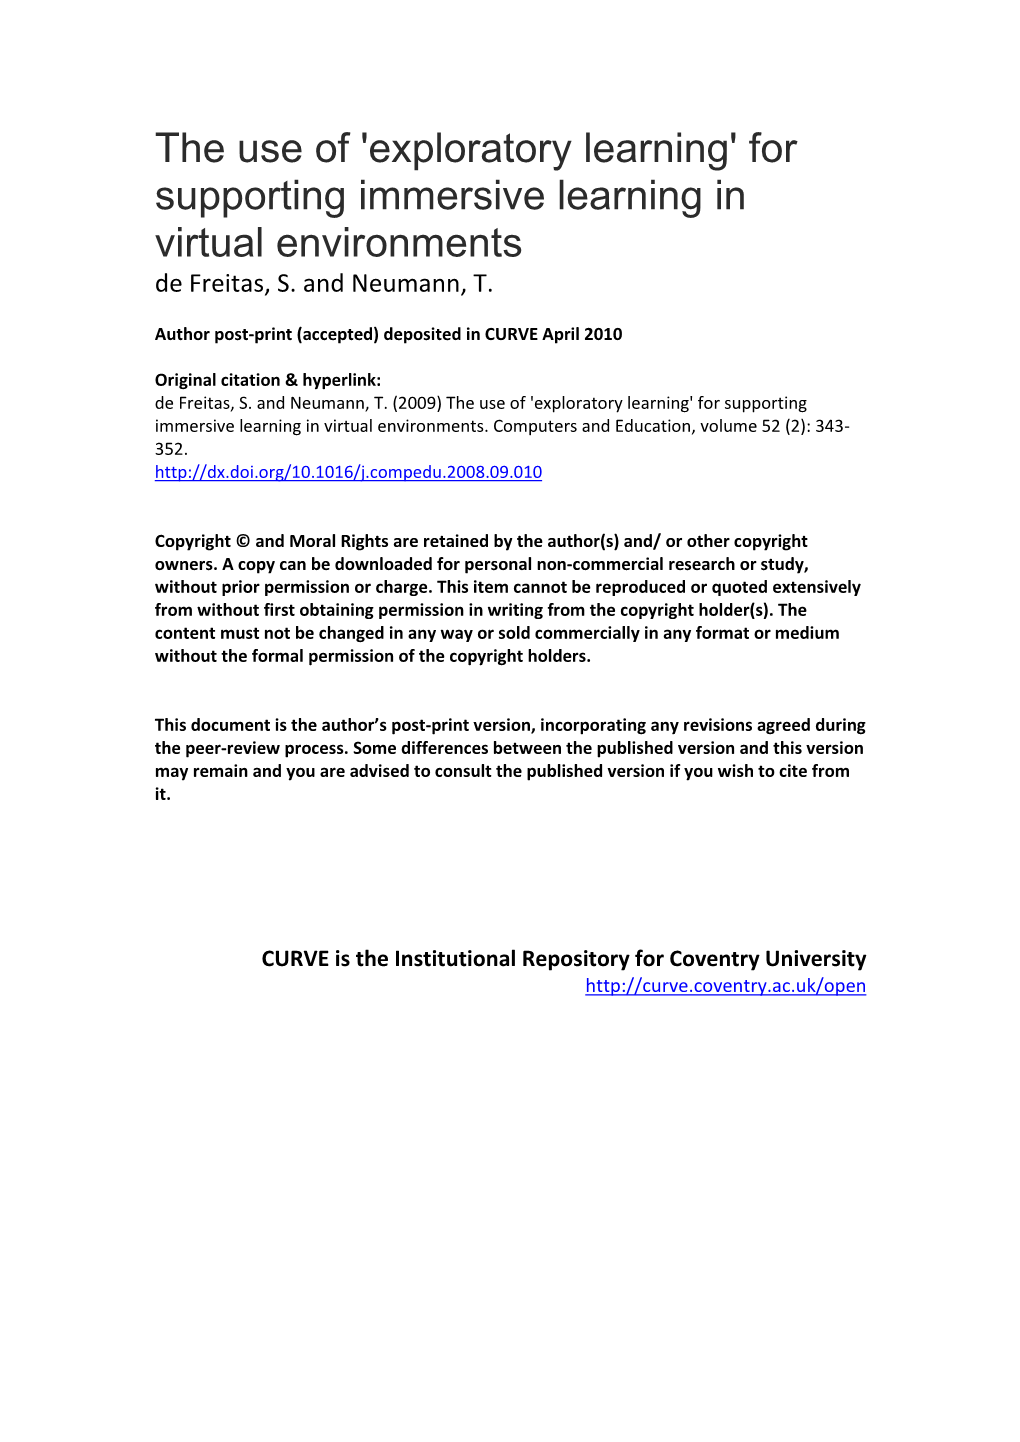 For Supporting Immersive Learning in Virtual Environments De Freitas, S